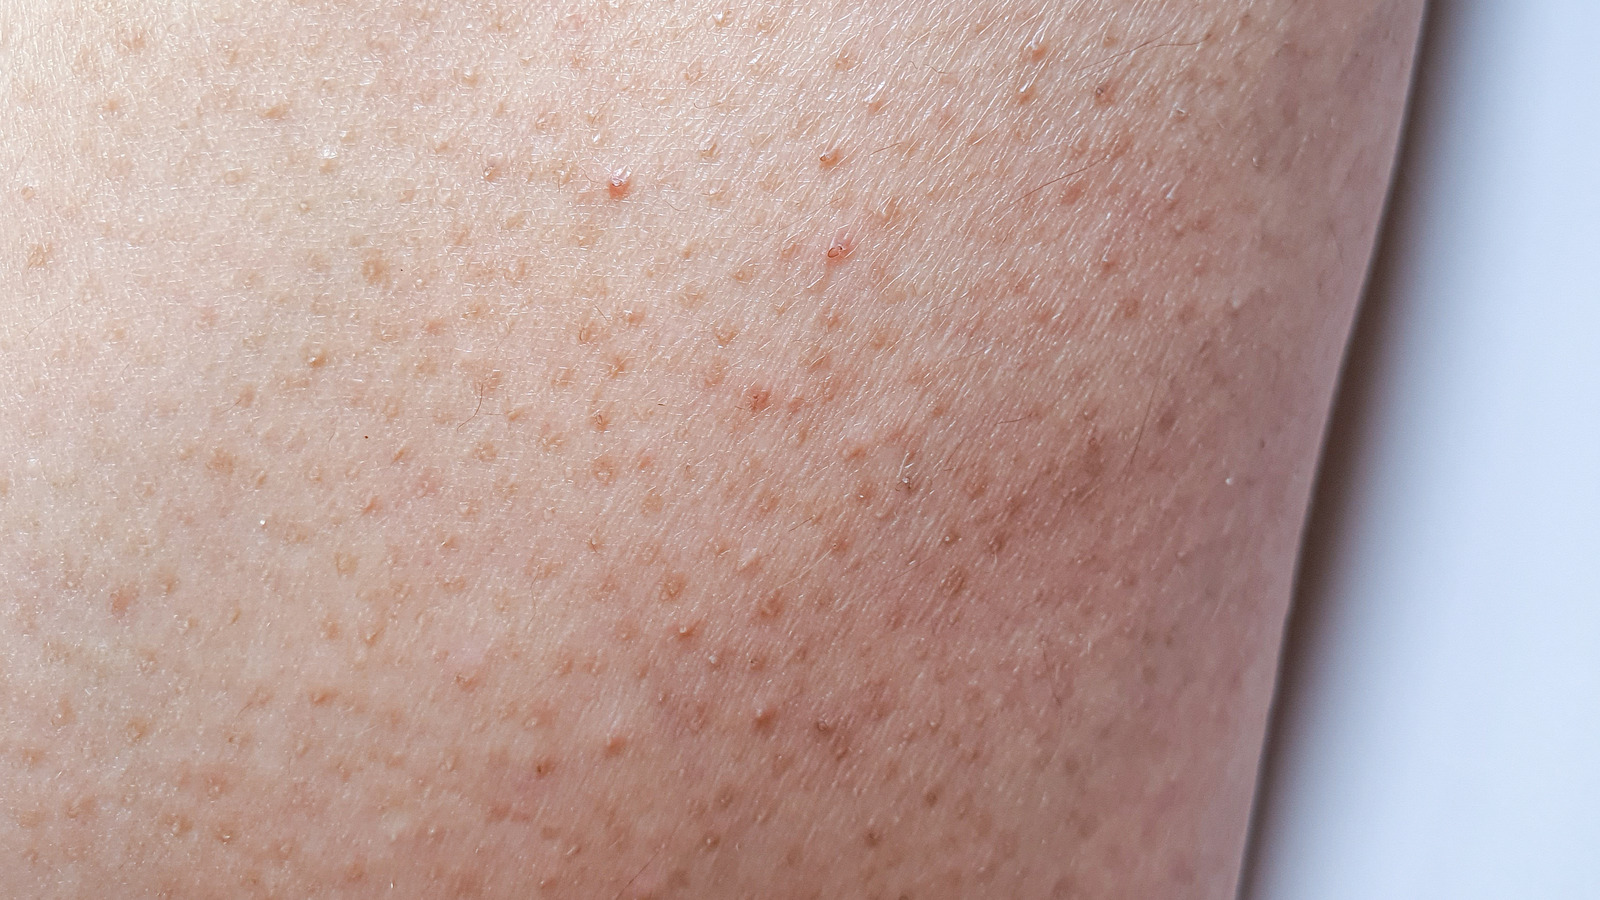 Little Bumps On Arms